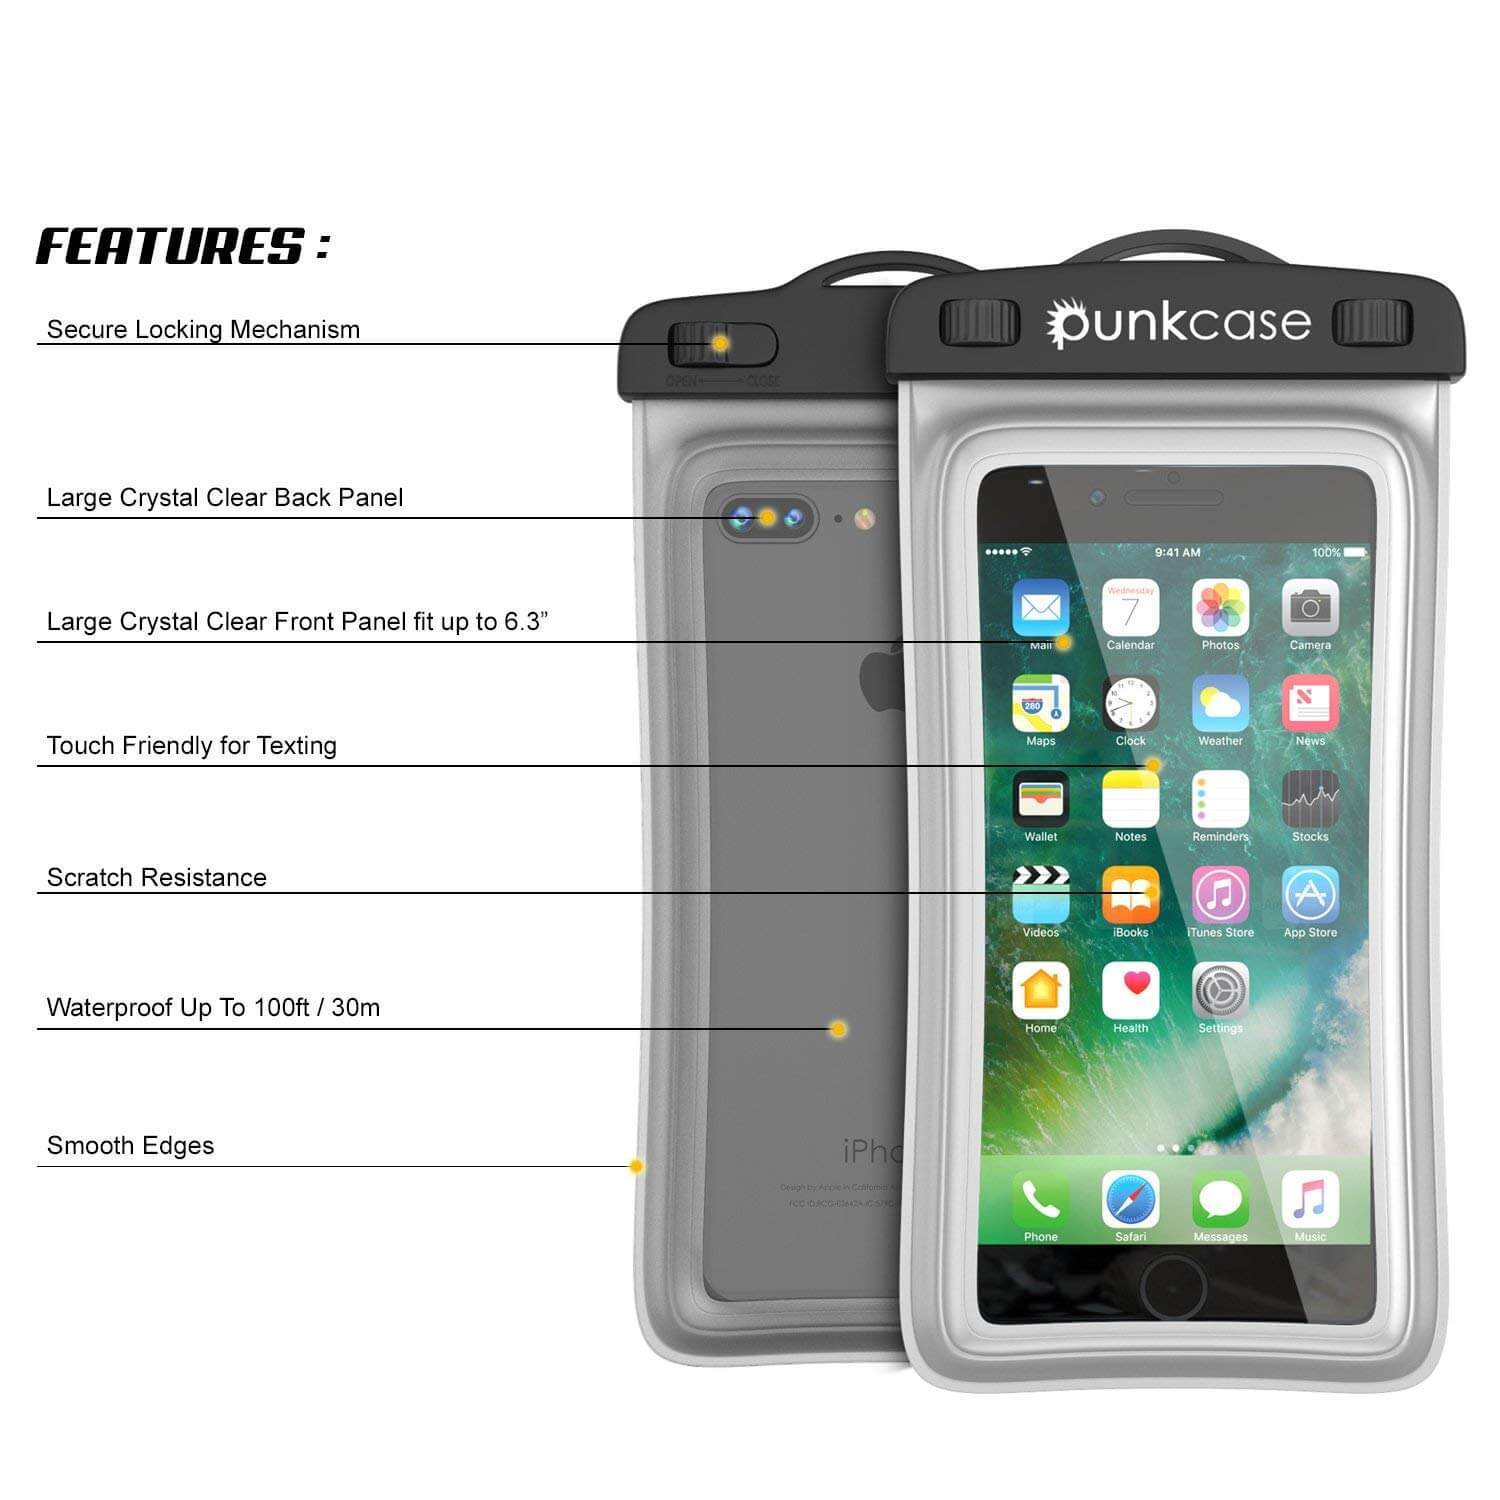 Waterproof Phone Pouch, PunkBag Universal Floating Dry Case Bag for most Cell Phones [Clear]